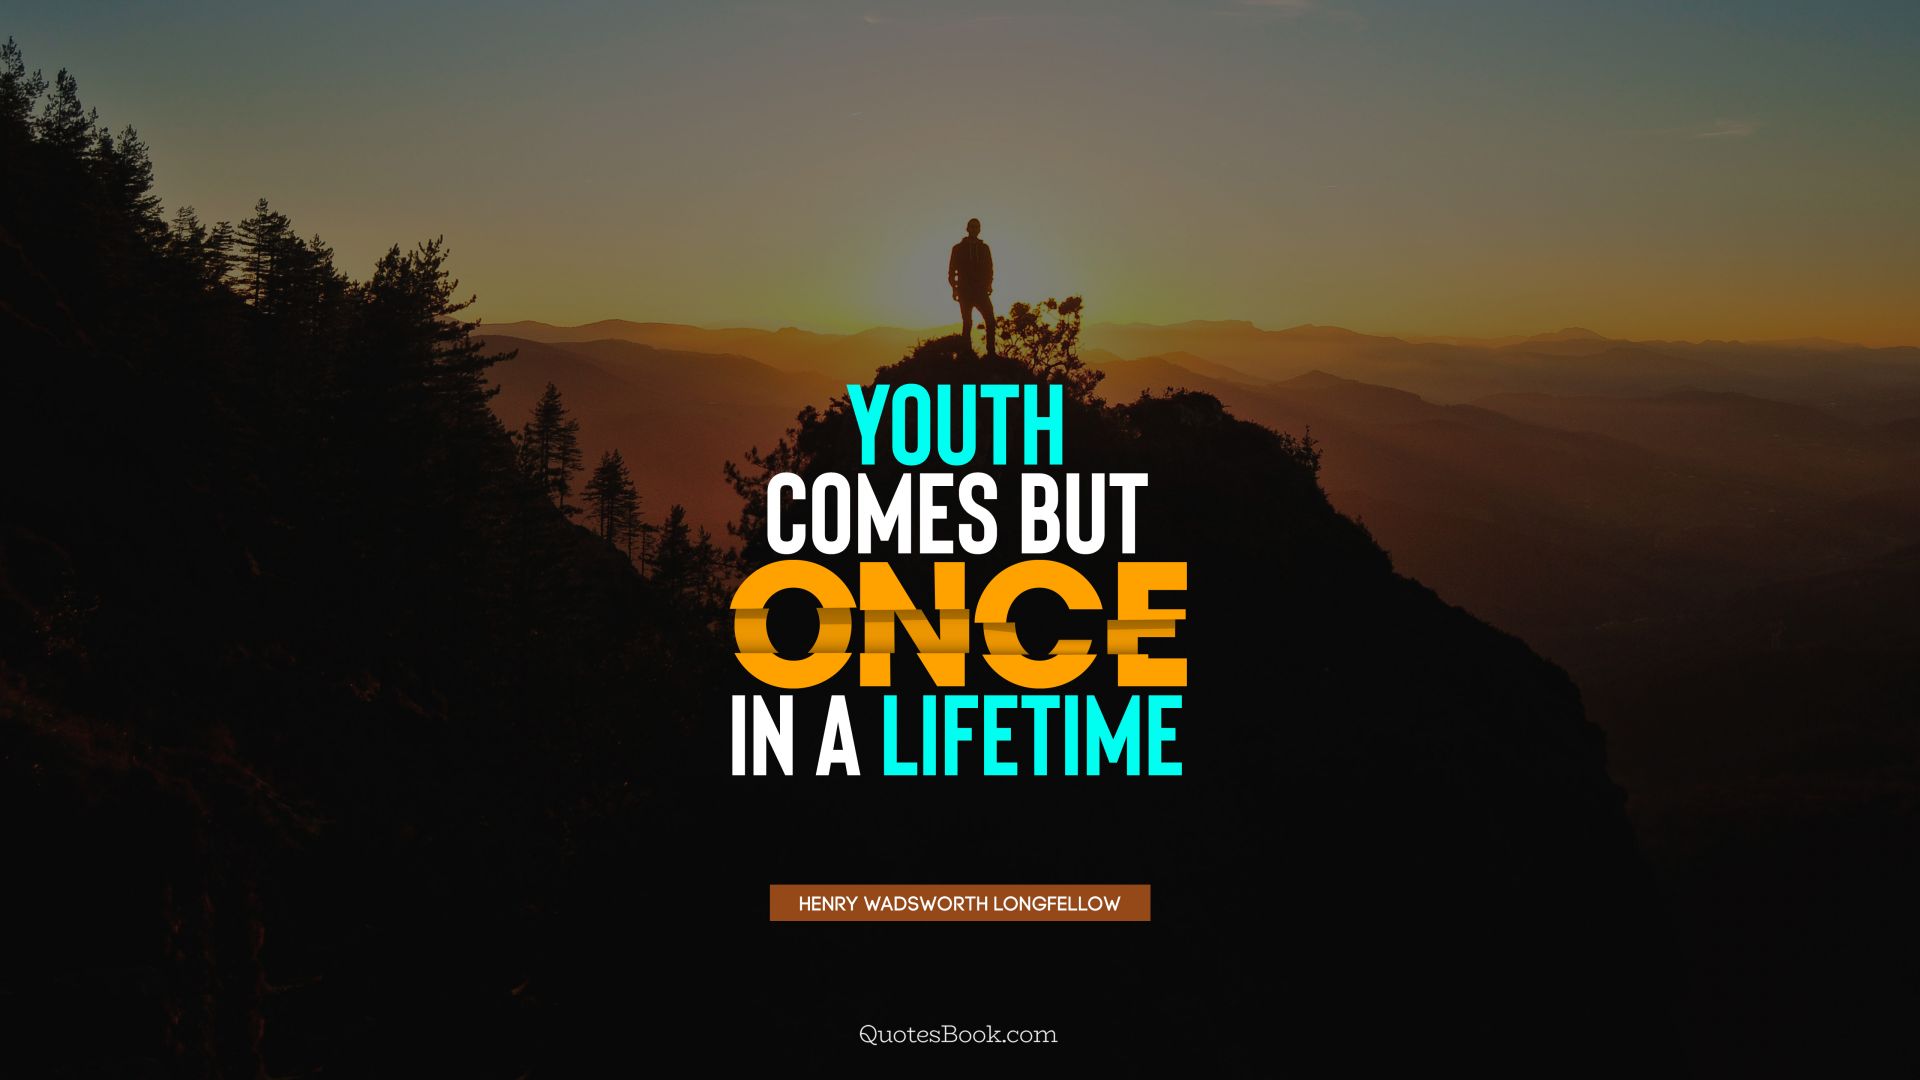 Youth comes but once in a lifetime. - Quote by Henry Wadsworth Longfellow